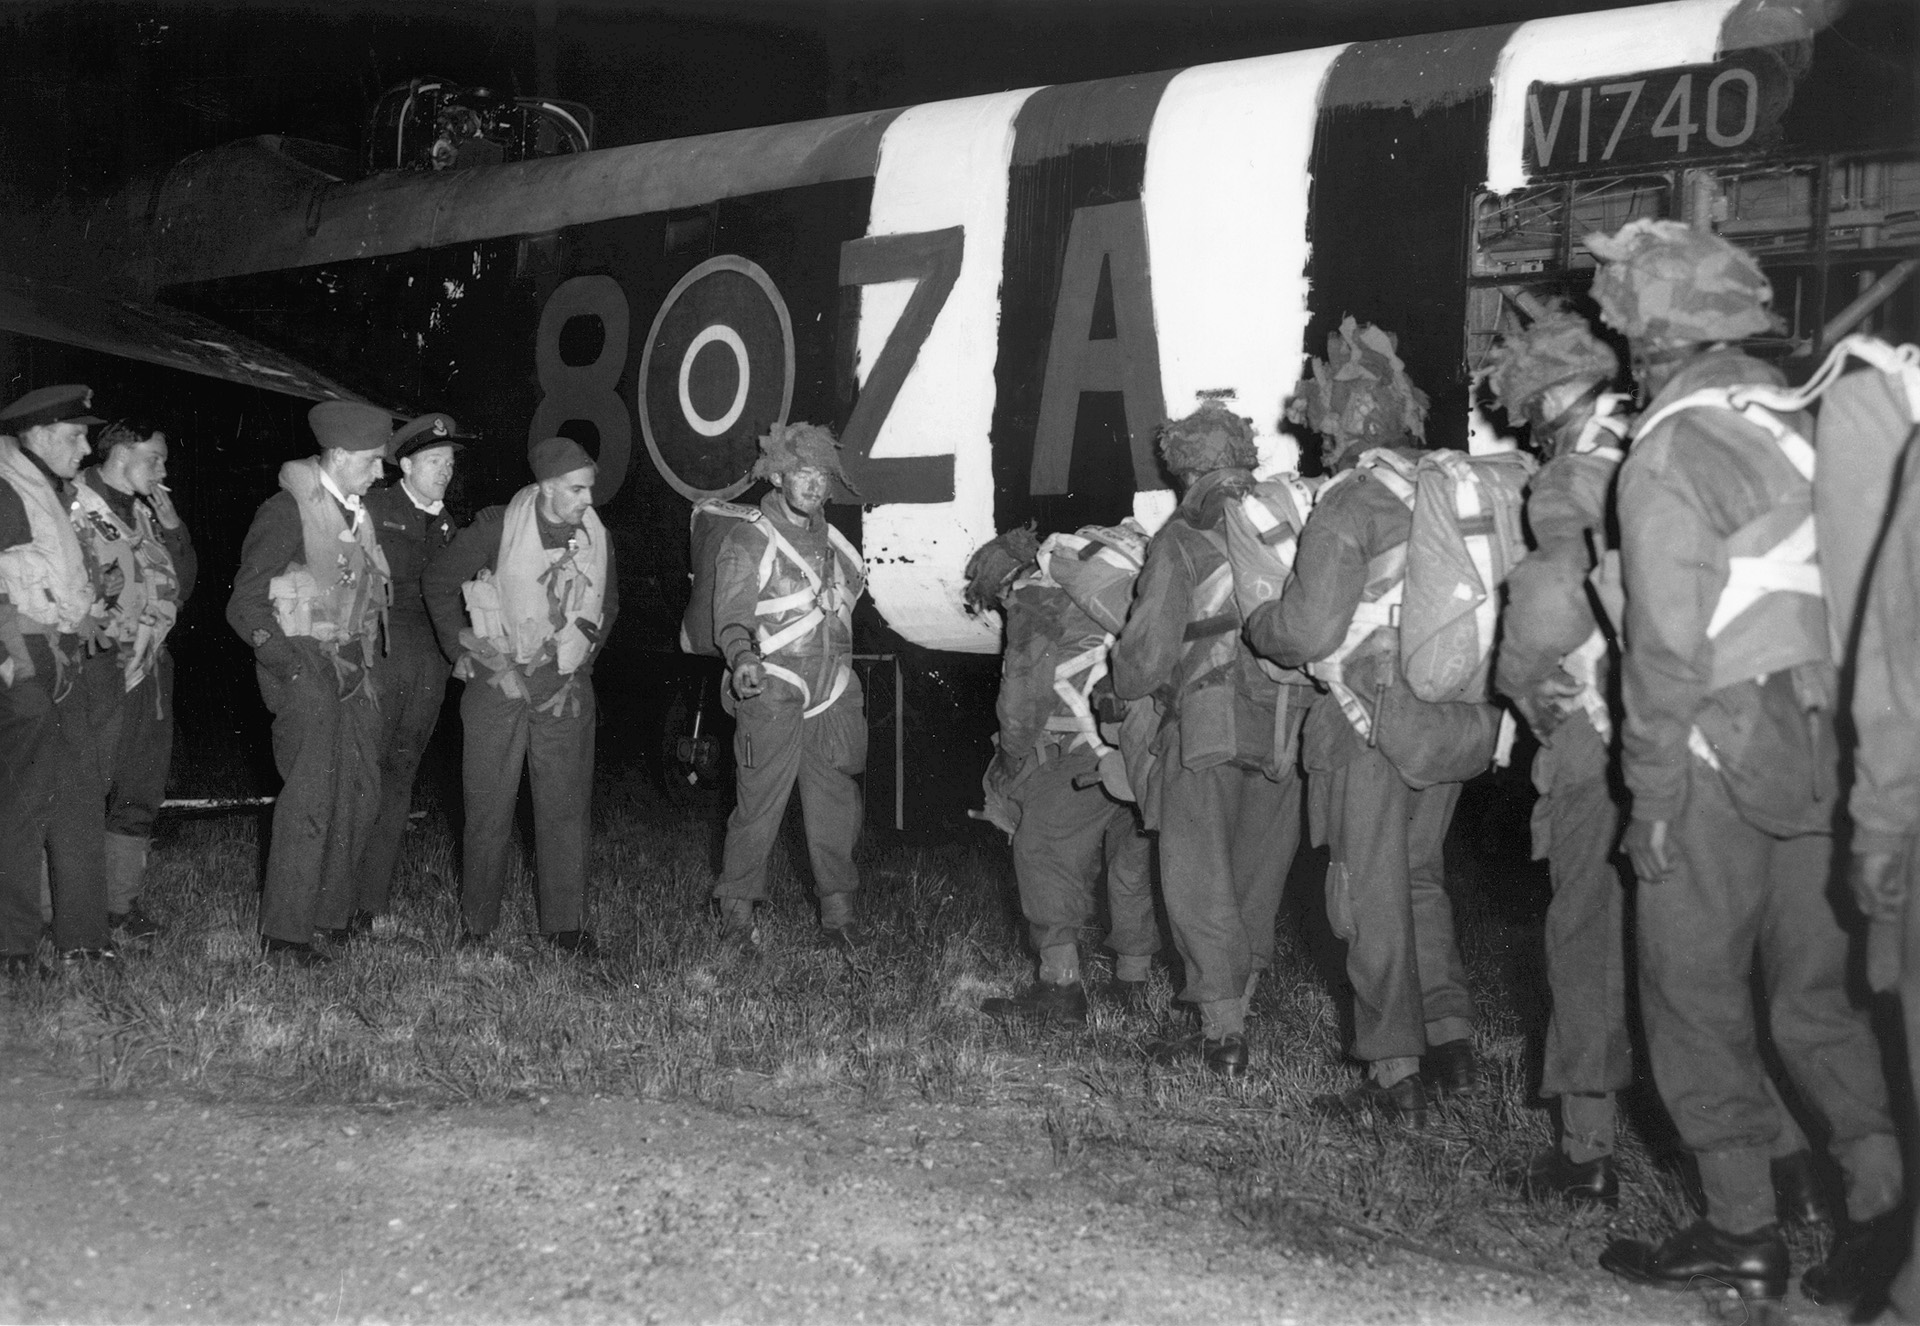 Next stop: Normandy. Members of the British 6th Parachute Division unit load into the belly of an Albemarle troop transport that will drop them into France.